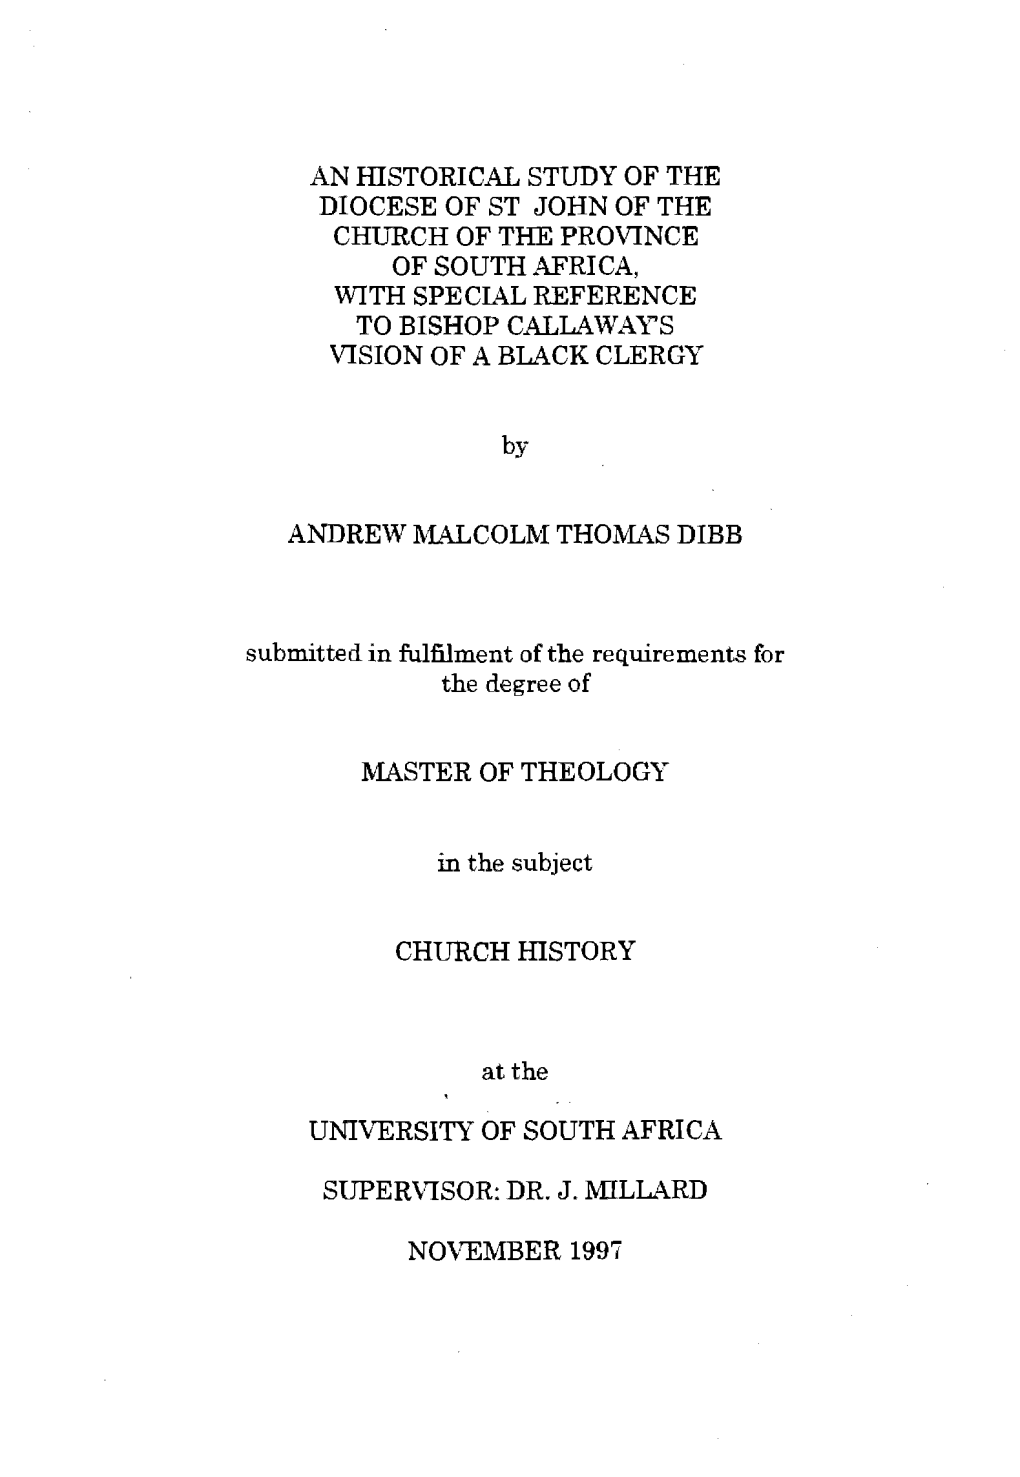 An Historical Study of the Diocese of St John of the Church of the Province of South Africa, with Special Reference to Bishop Calla Ways Vision of a Black Clergy